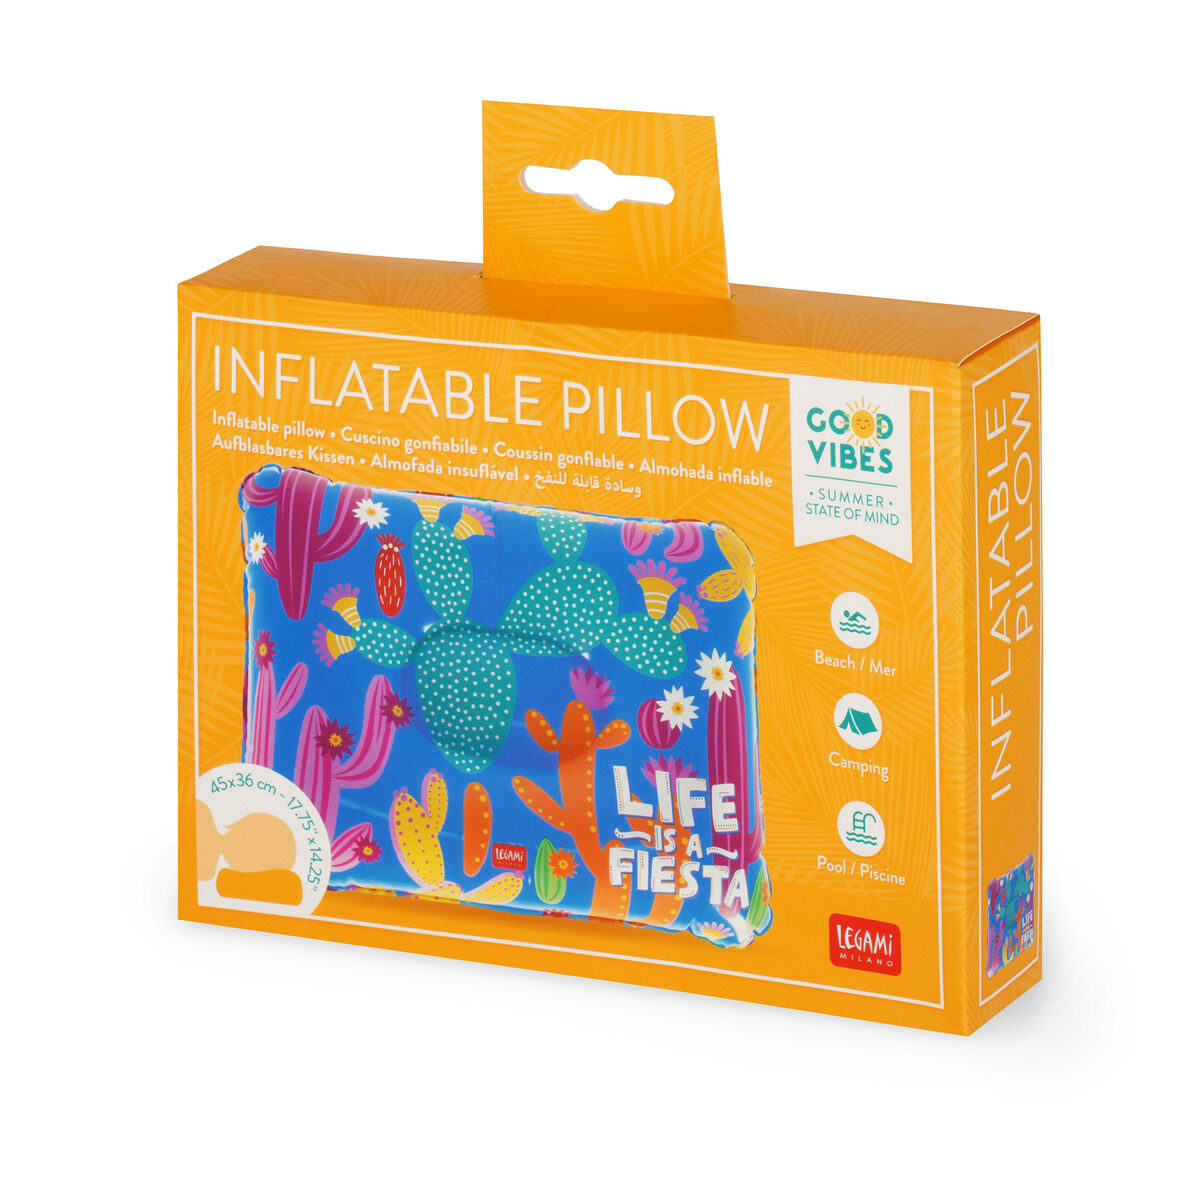 Coussin Gonflable - Inflatable Pillow, , zoo